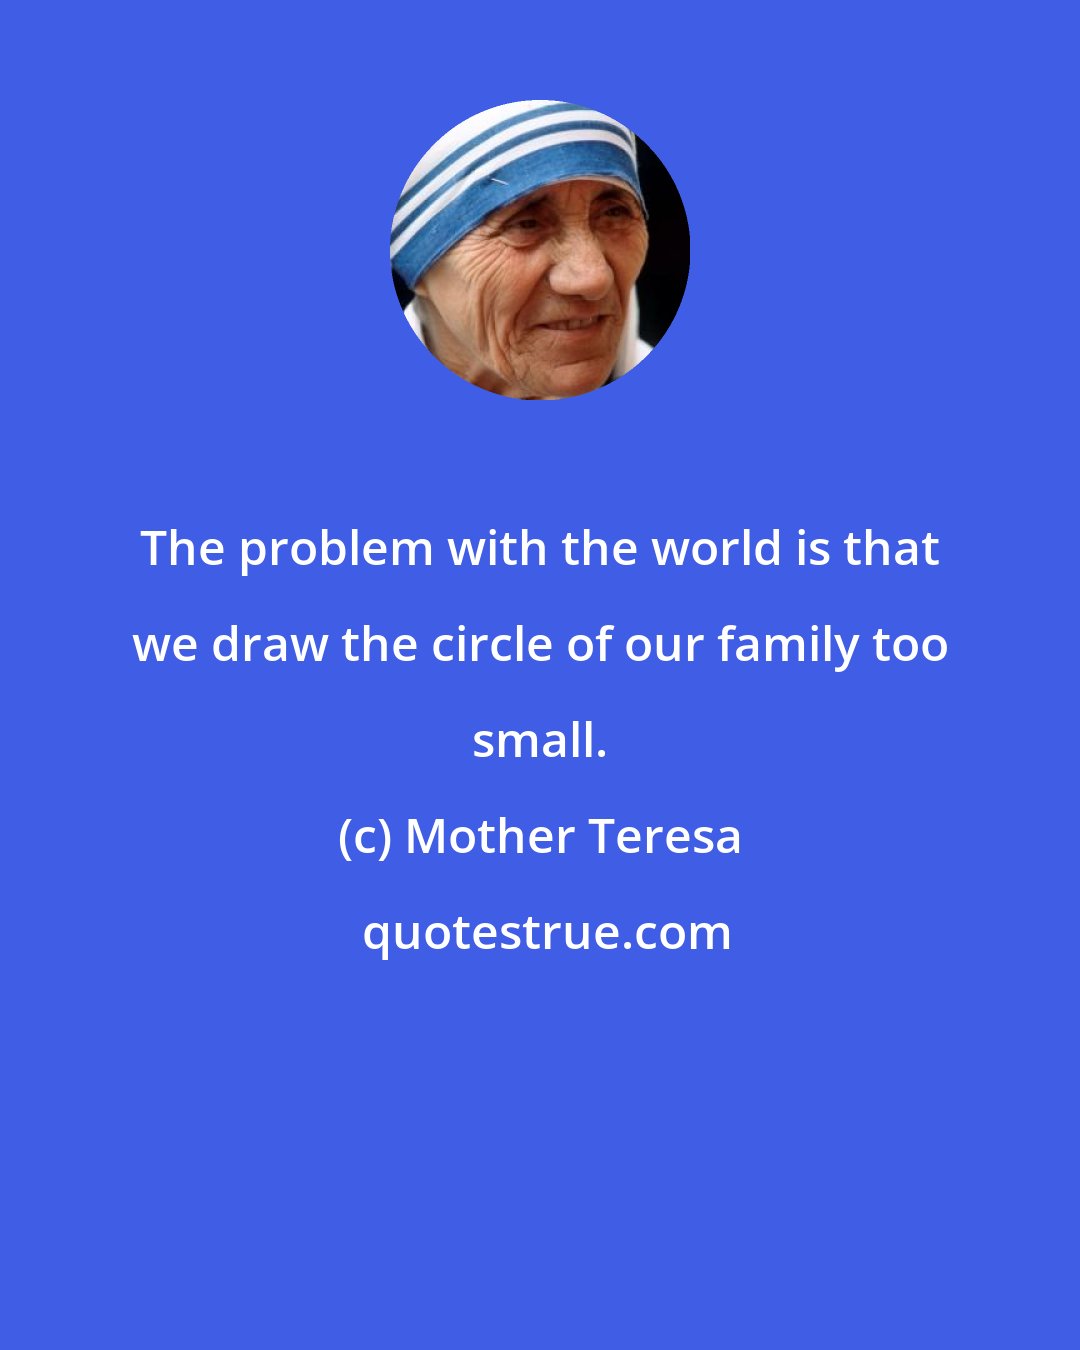 Mother Teresa: The problem with the world is that we draw the circle of our family too small.